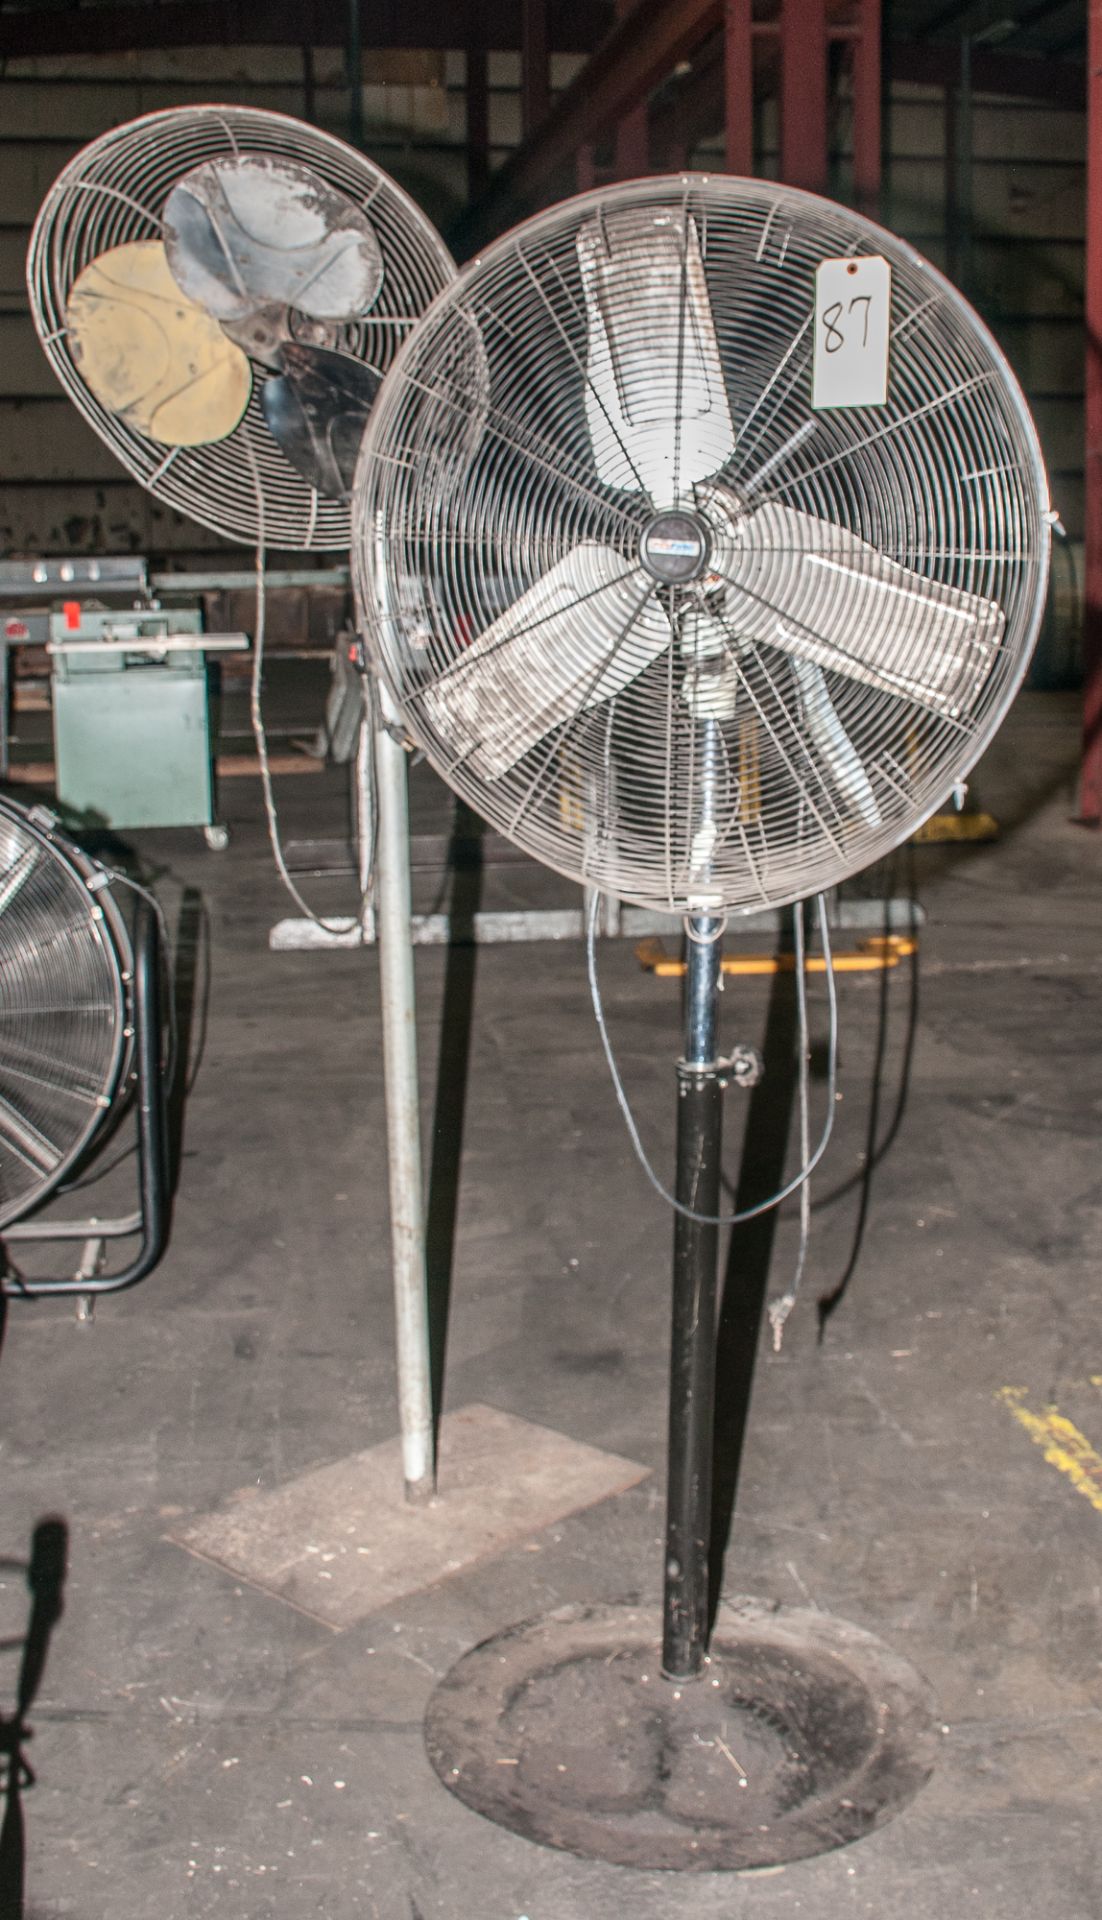 (2) Pedestal Fans (1) 30" ProFitter, (1) 24" Unknown with FaceShield Missing